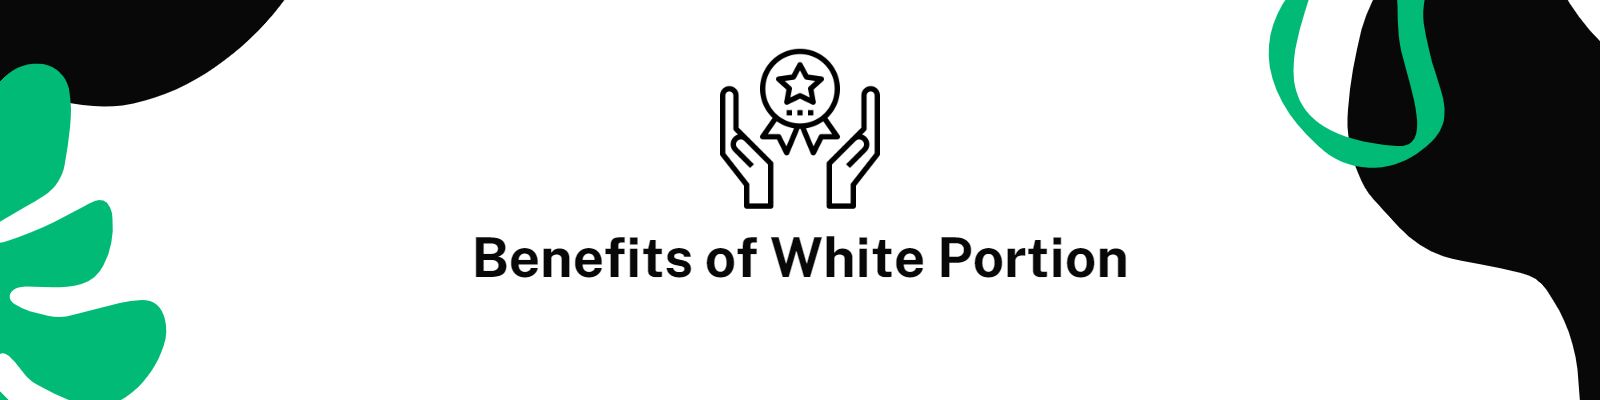 Benefits of white portion